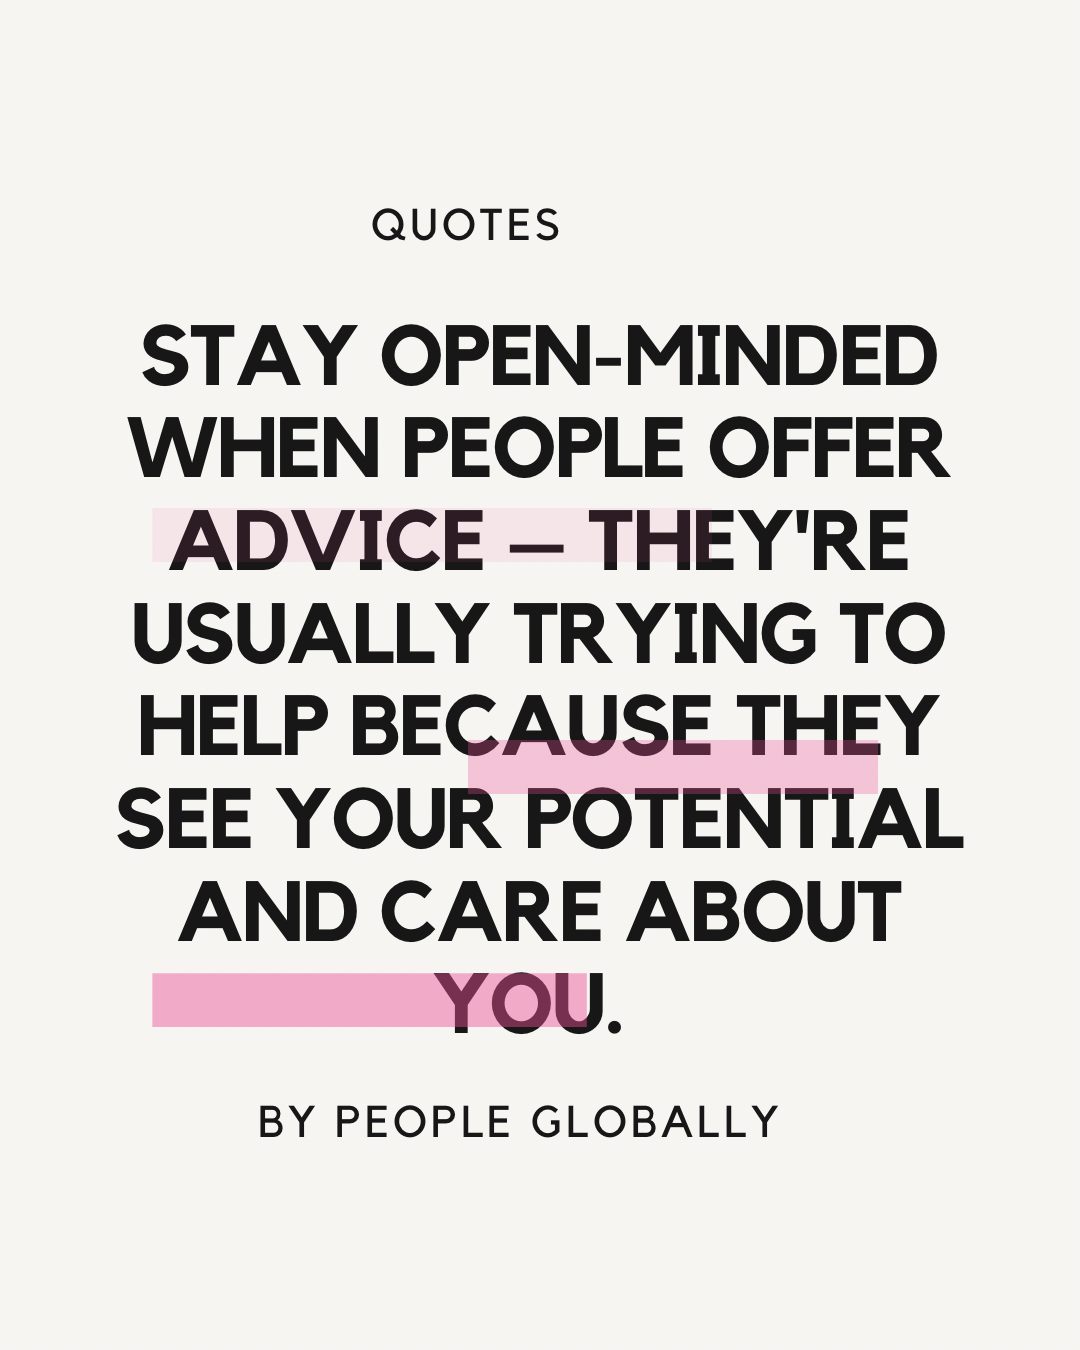 Stay open-minded when people offer advice – they’re usually trying to help because they see your potential and care about you.